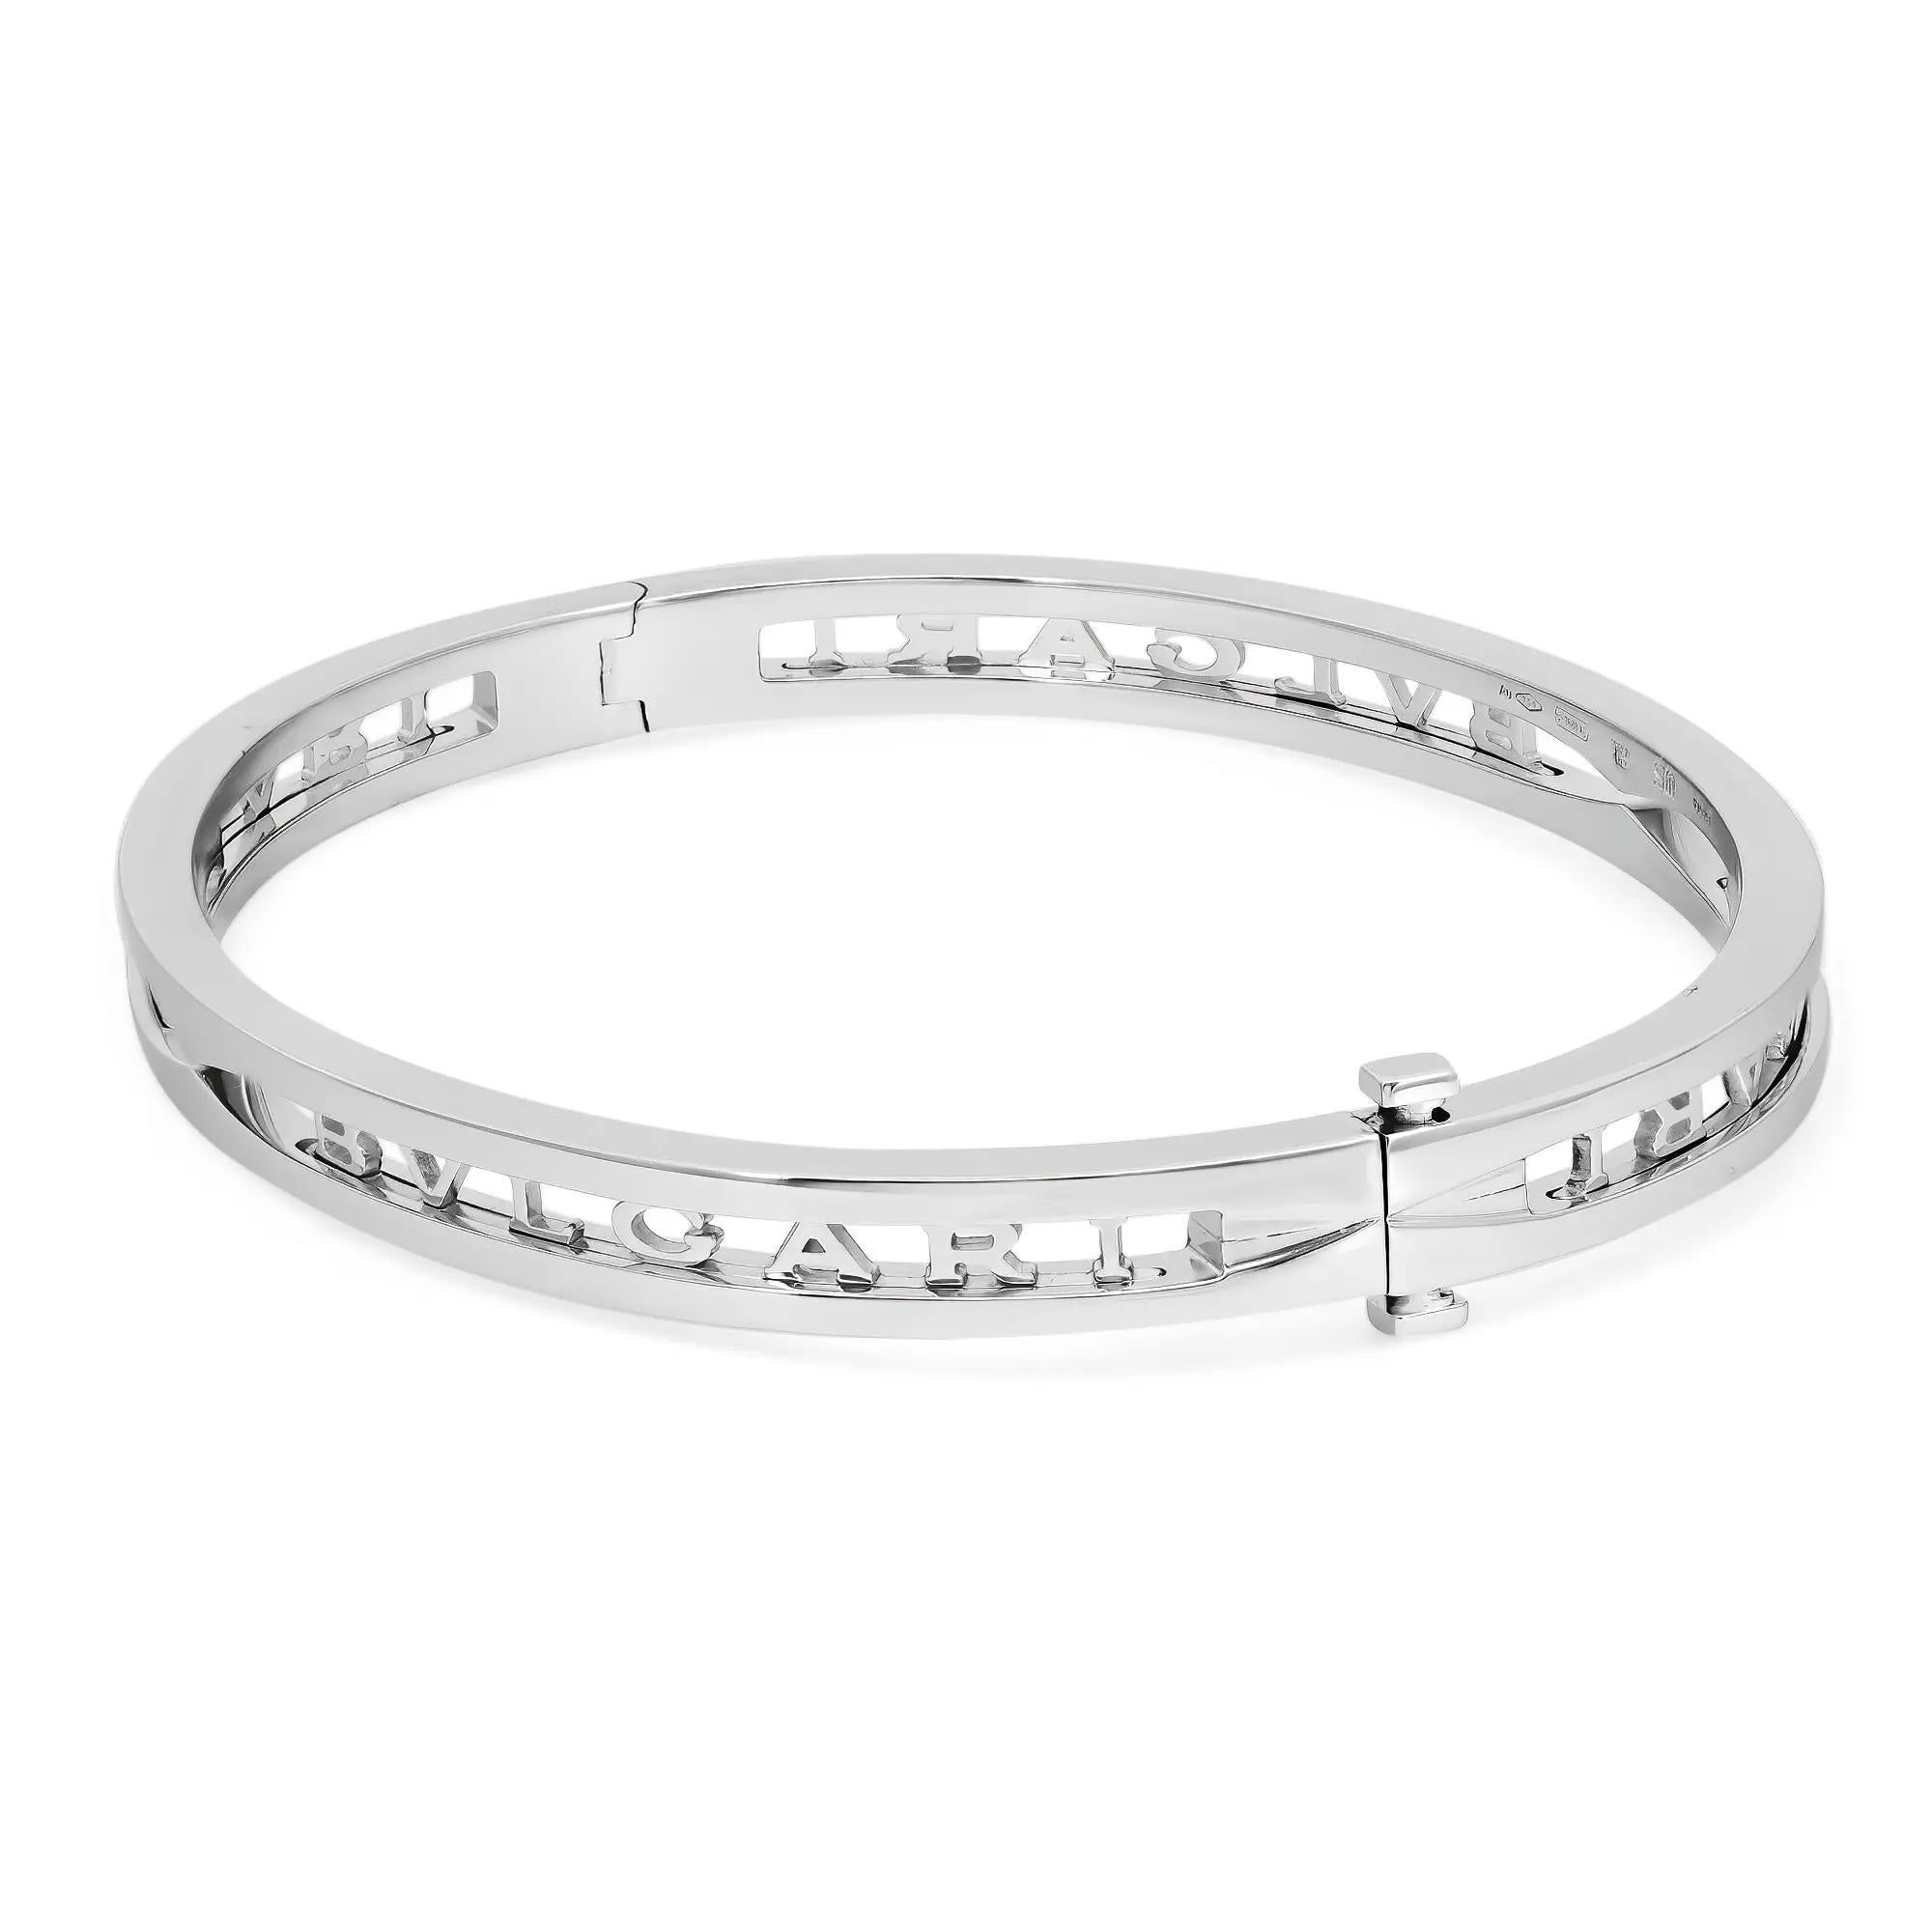 Bold and beautiful, this bracelet is a true essence of jewelry aesthetics. Crafted in lustrous 18K white gold. This bracelet features an oval-shaped bangle with the Bvlgari logo cut out. Super stackable and easy to wear. Size: Small ( fits up to 6.5